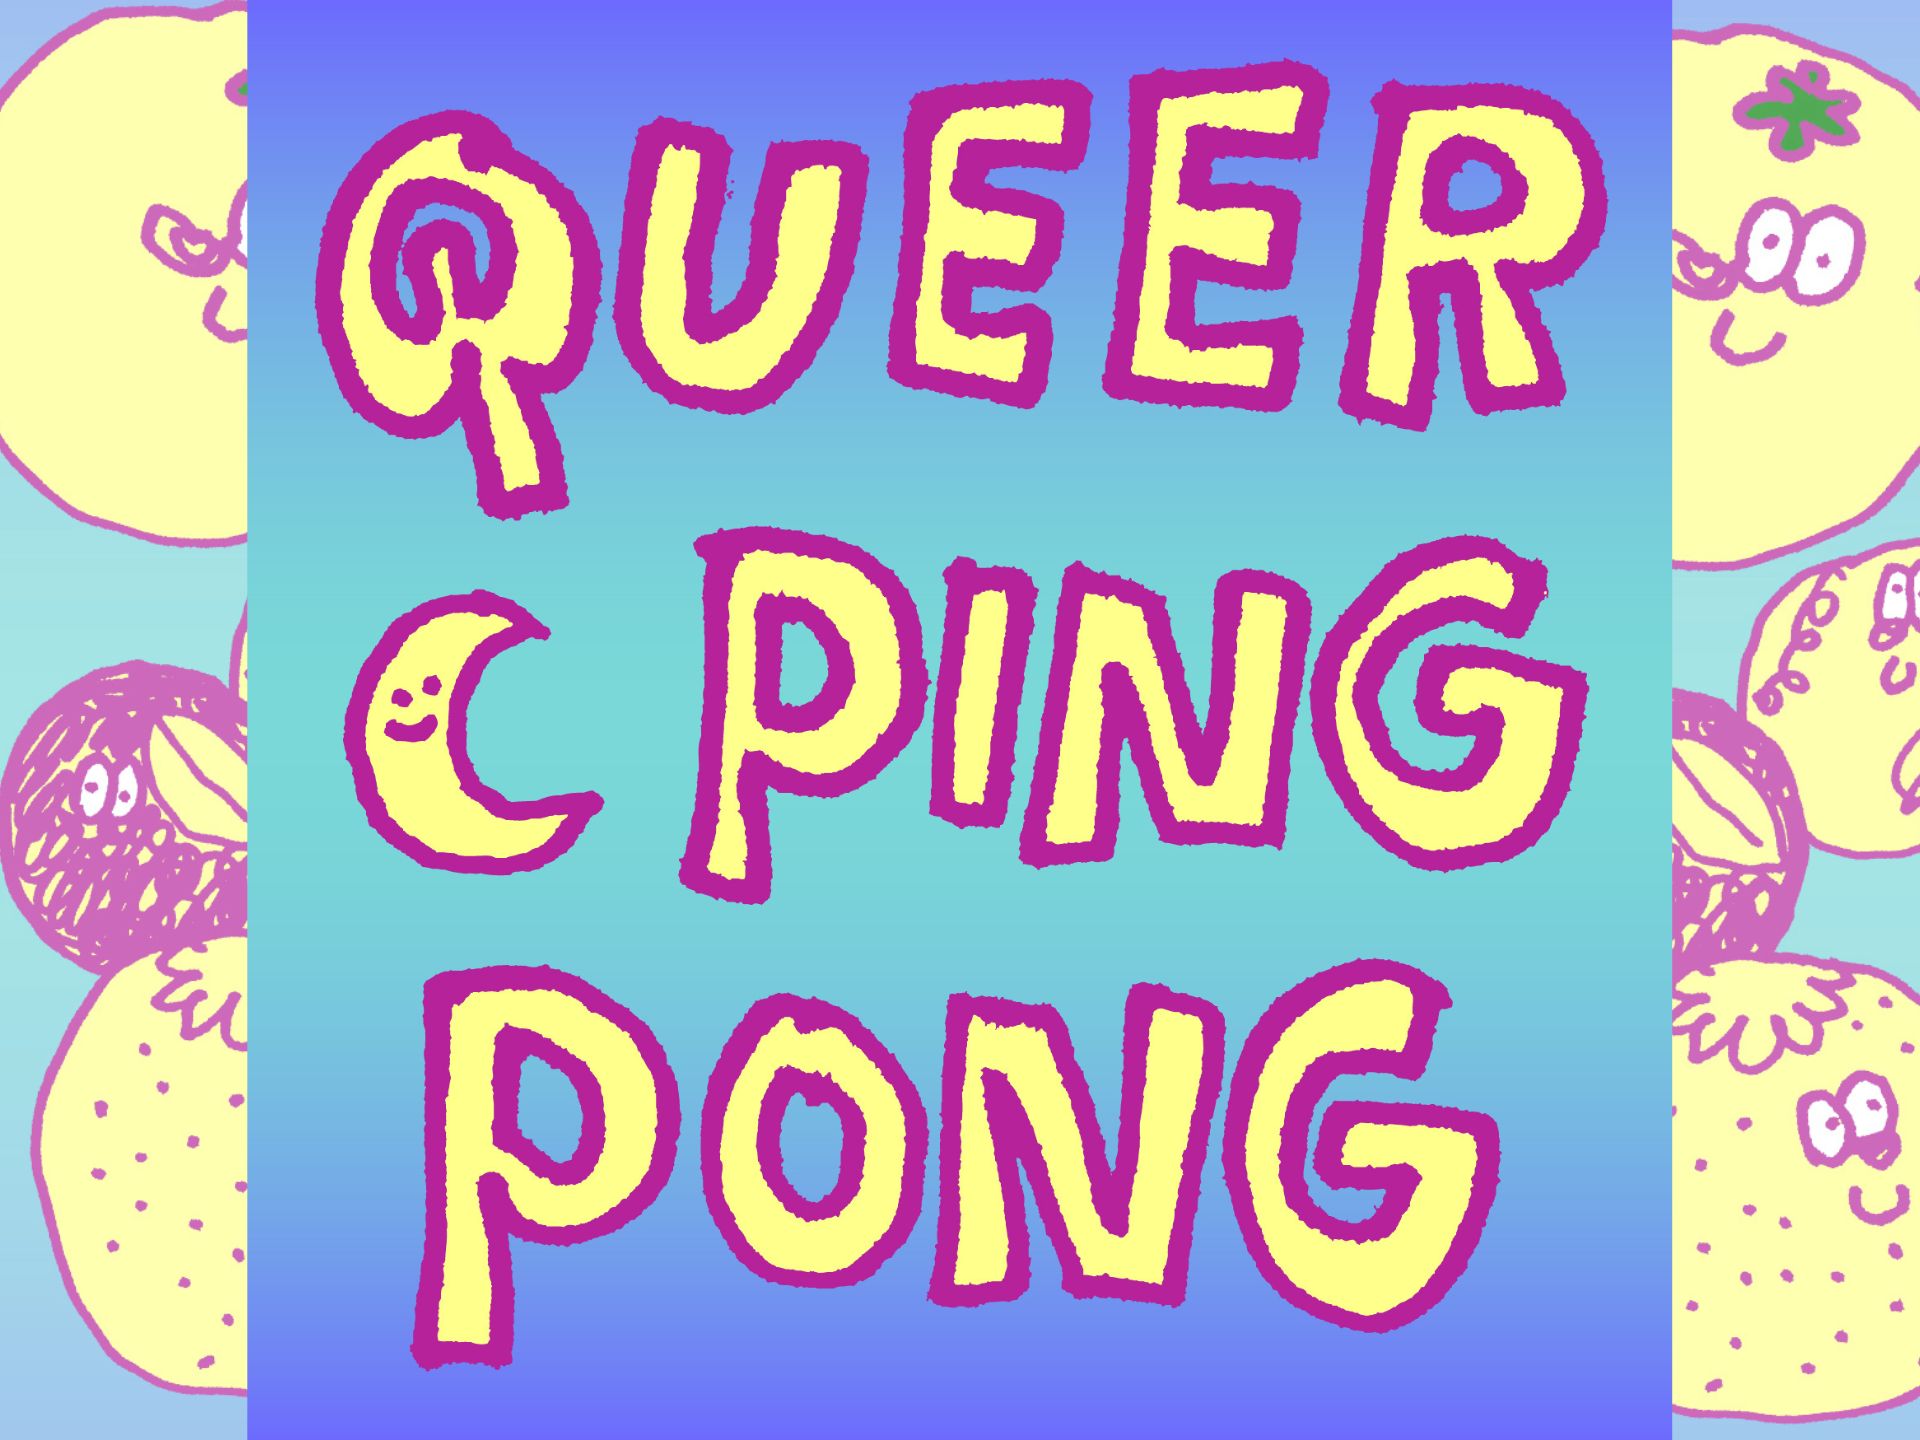 I-Queer ping pong